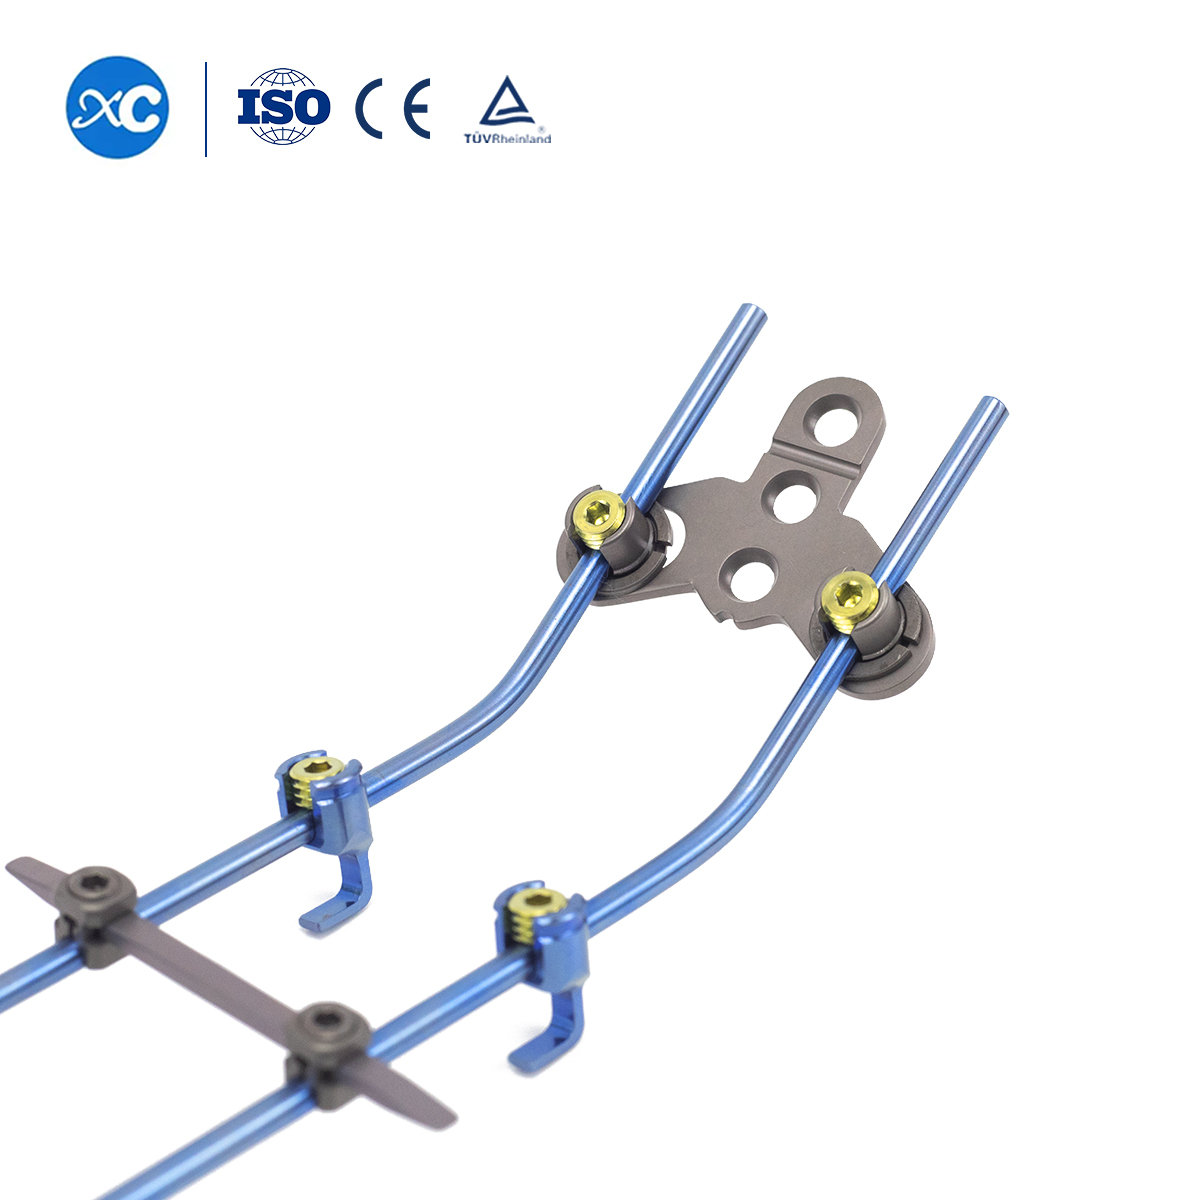 XC Medico® Spinal Implant Posterior Cervical Fixation System